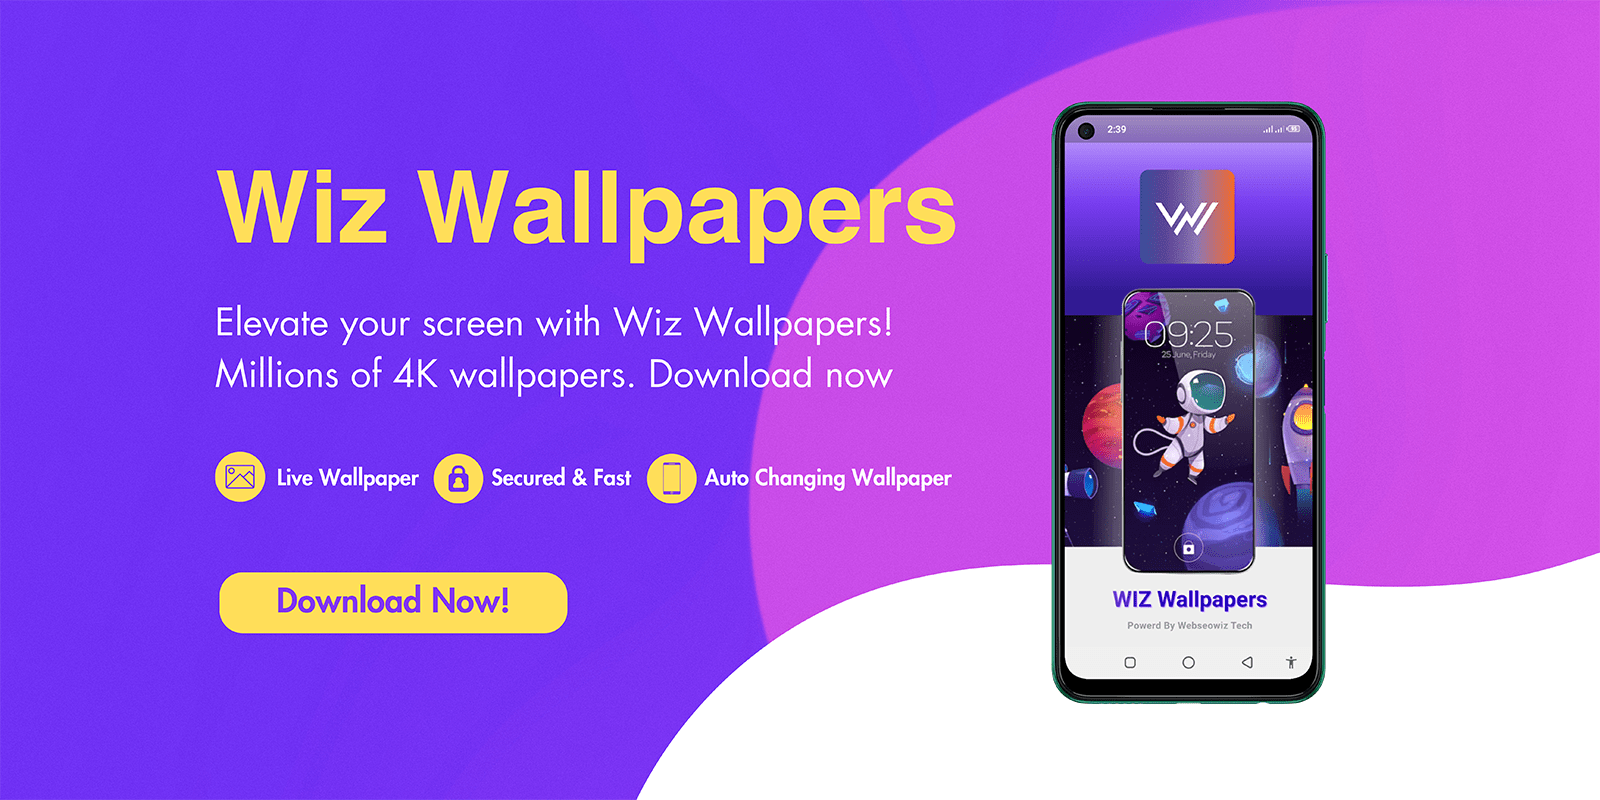 Elevate your screen with Wiz Wallpapers! Millions of 4K wallpapers. Download now